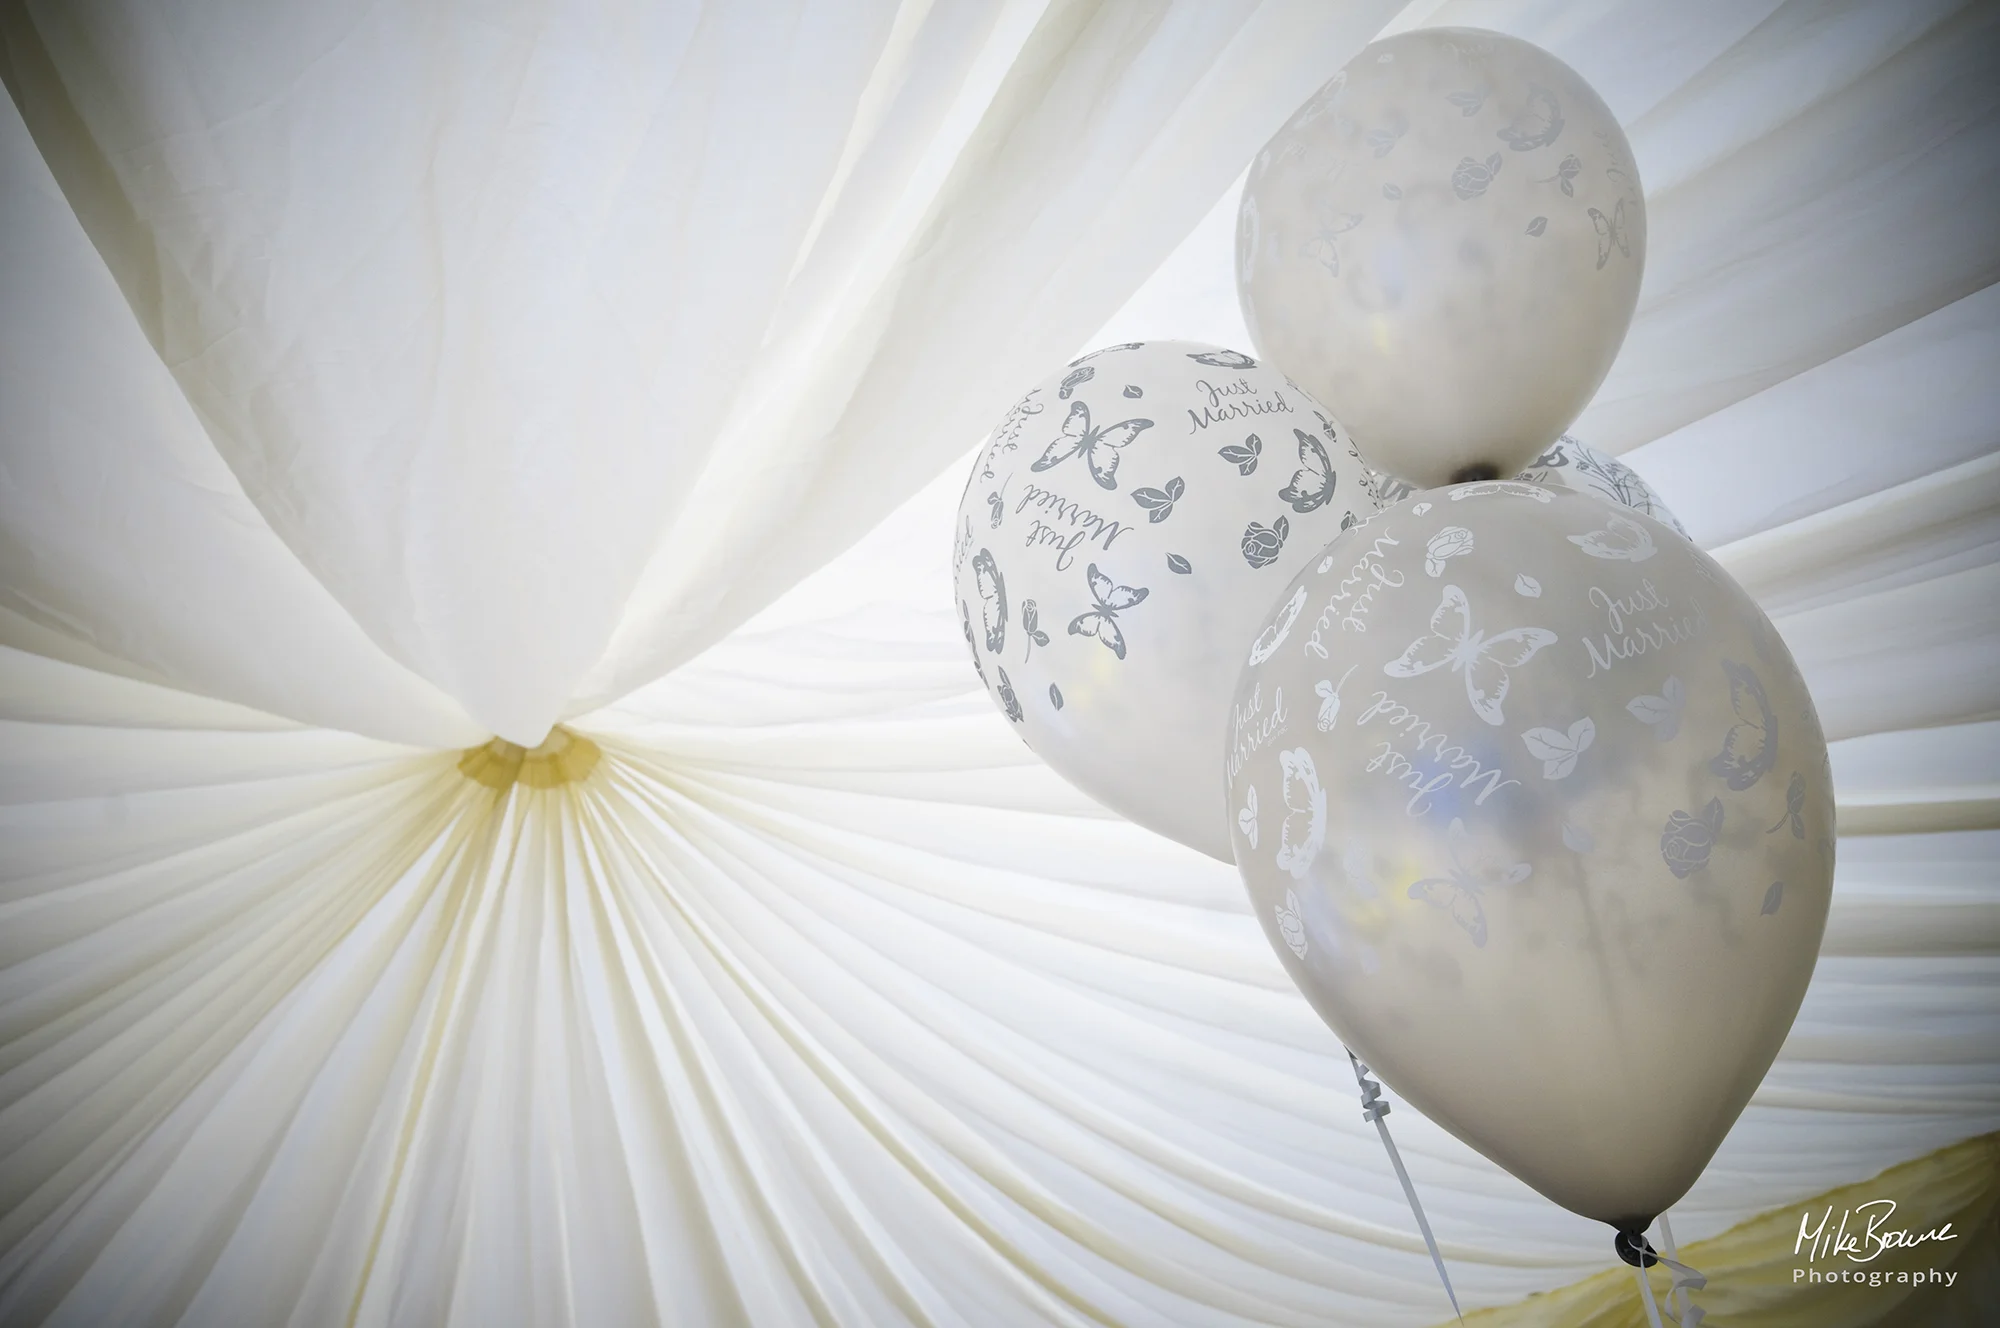 Three white balloons with silver stars in a marquee